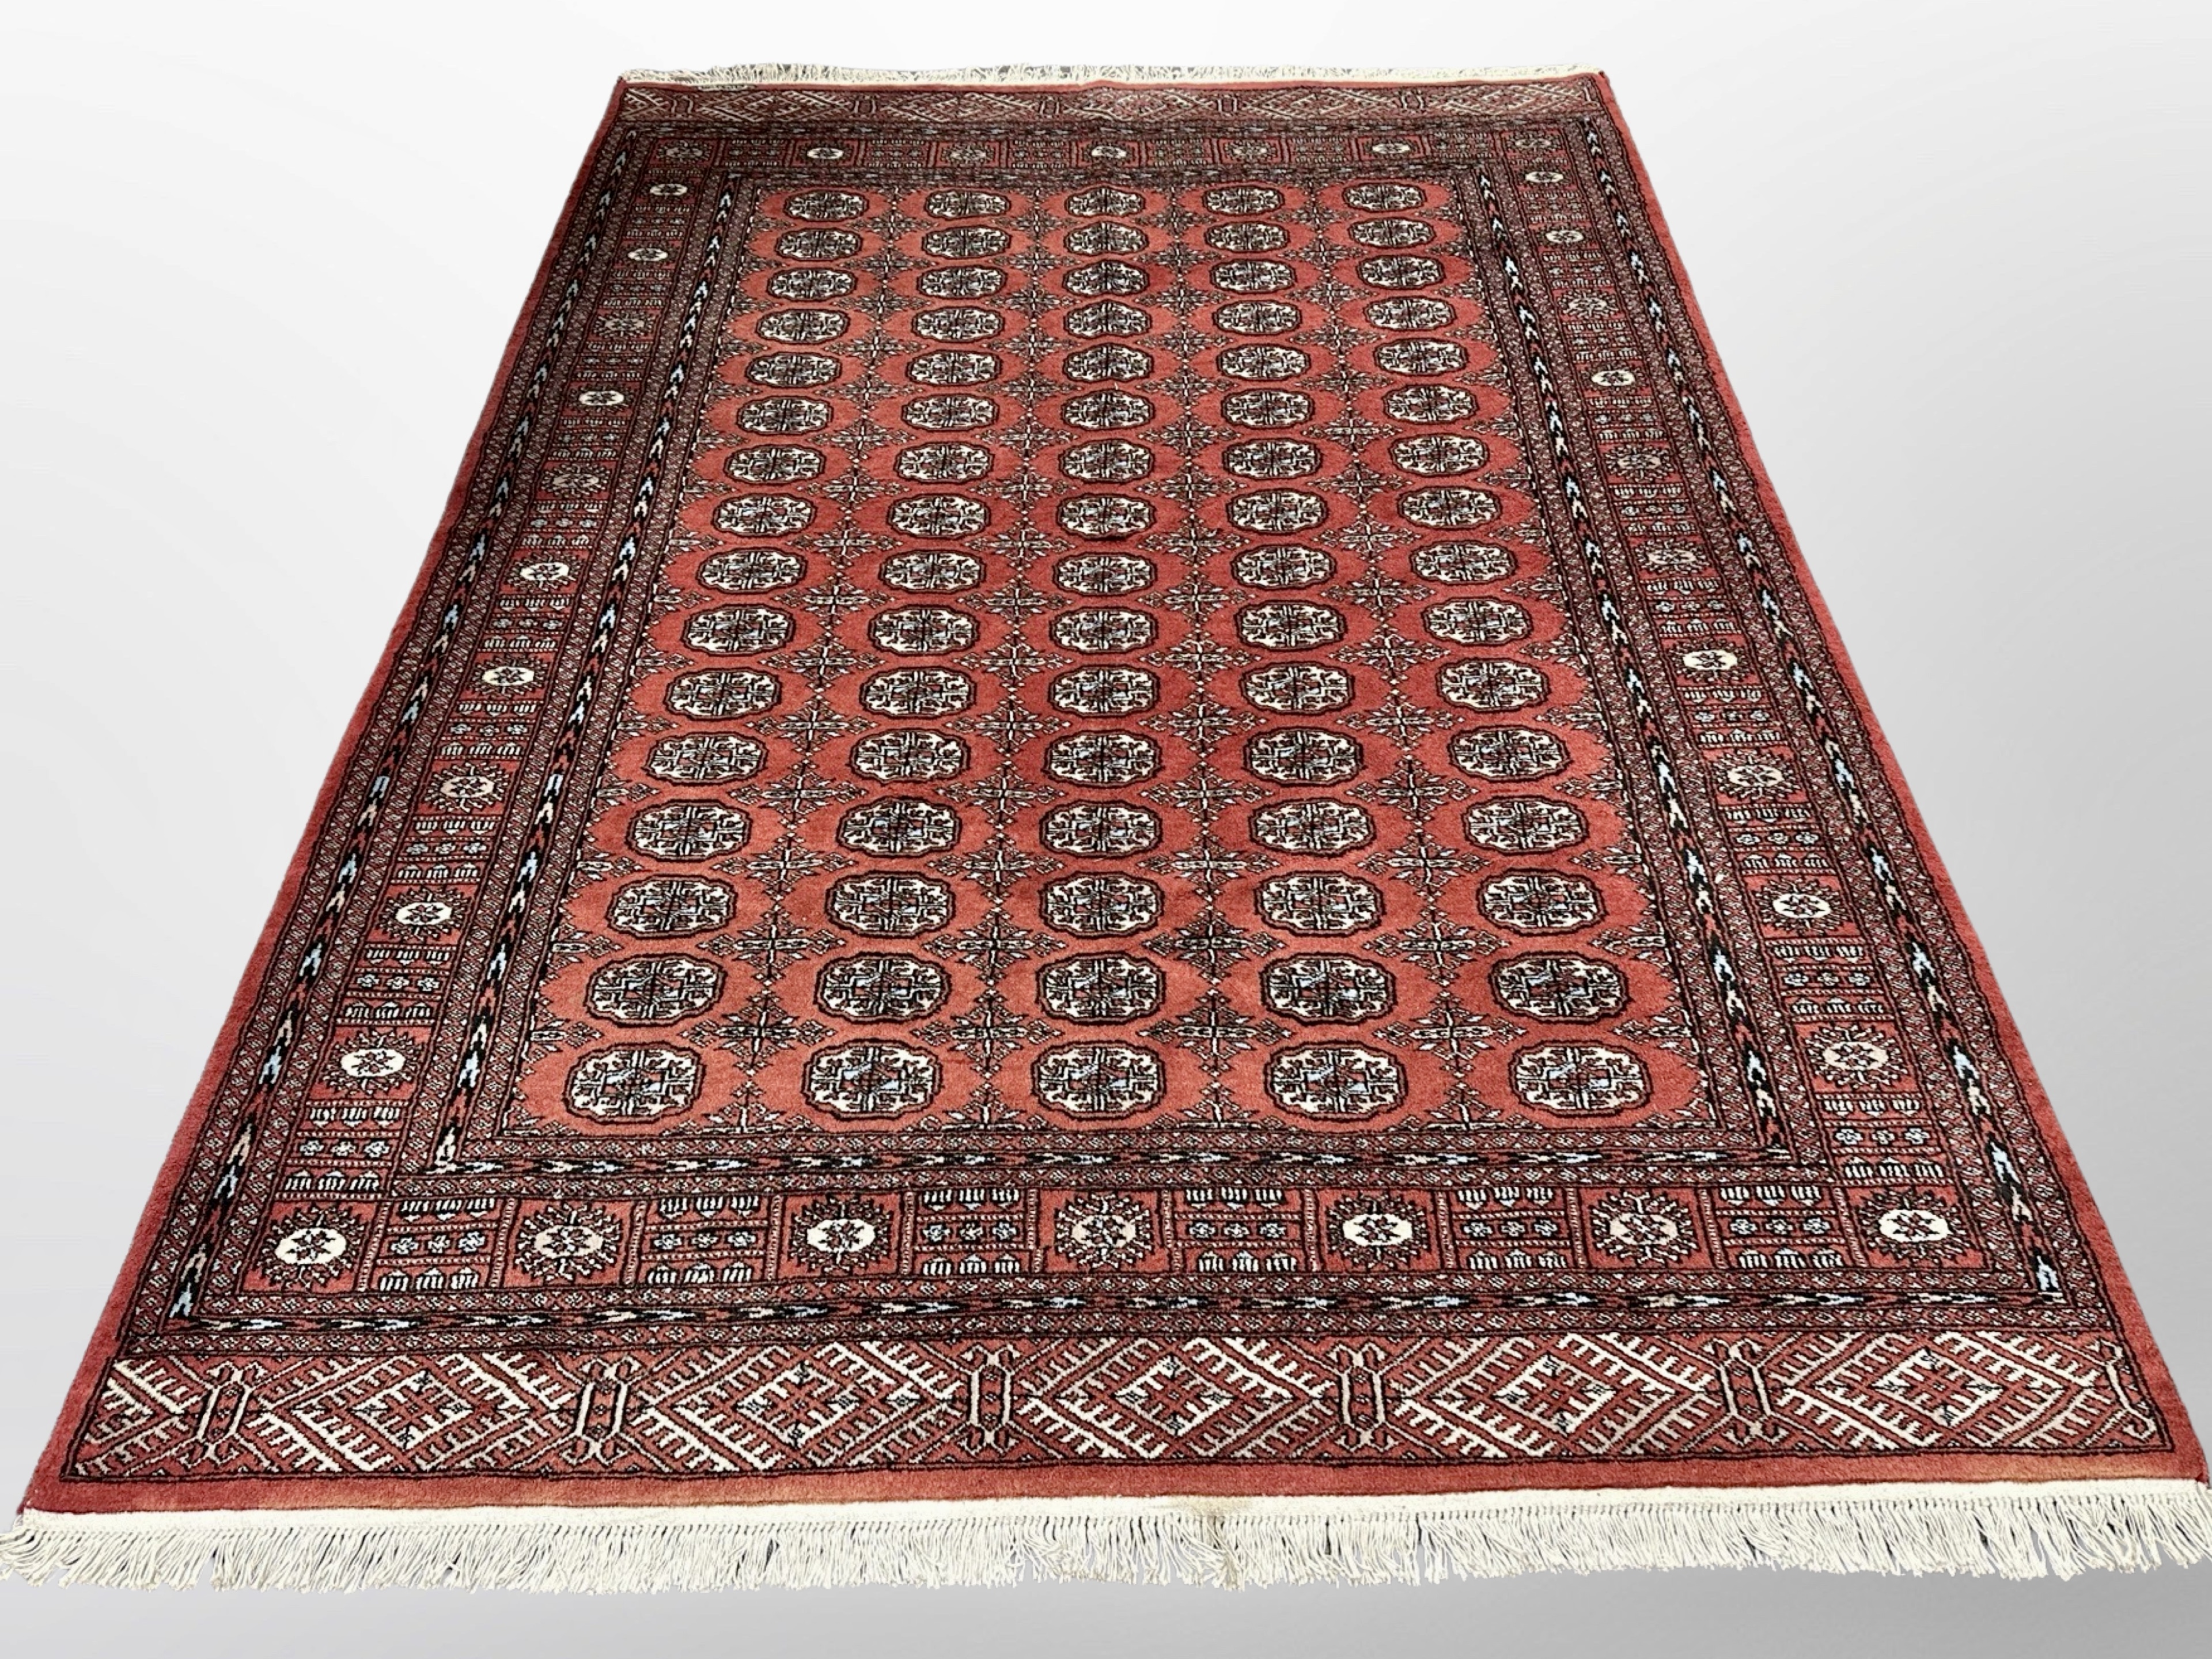 A Lahore Bokhara rug on red ground 253 cm x 171 cm